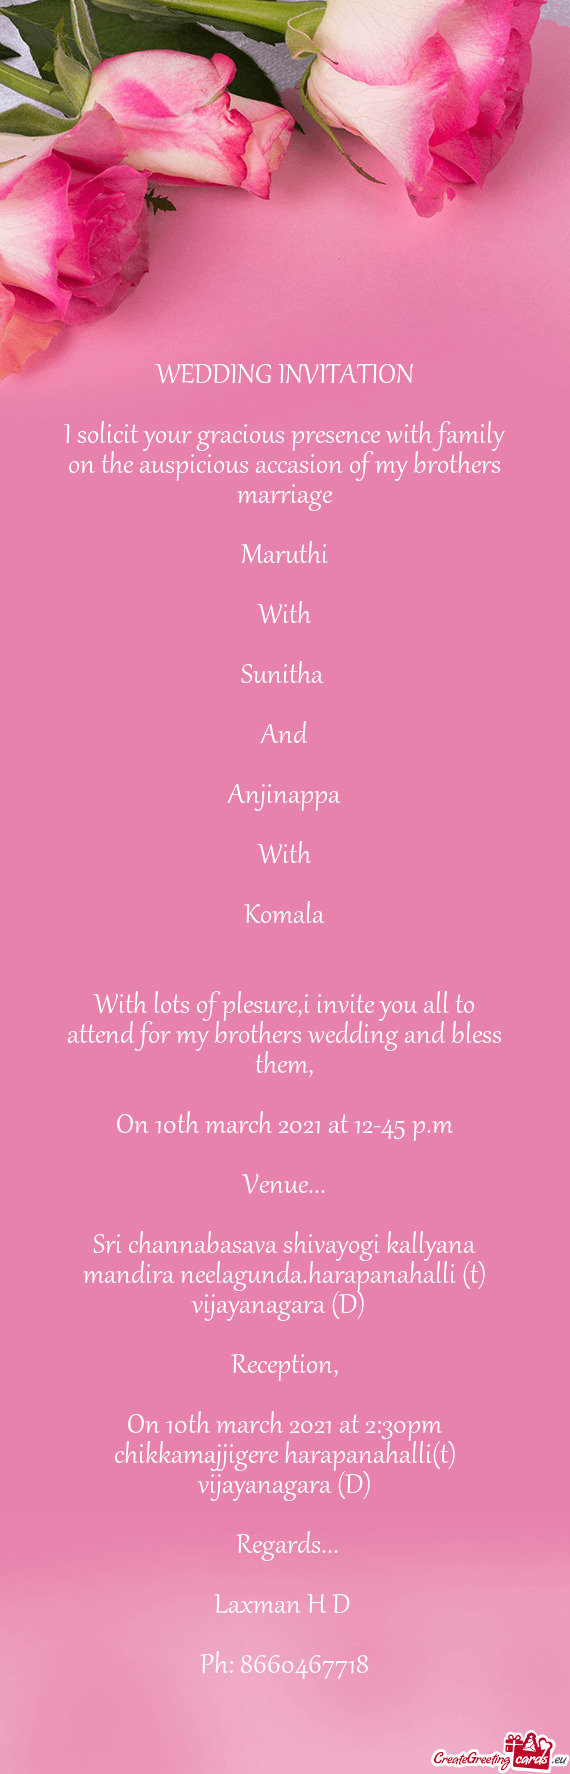 With lots of plesure,i invite you all to attend for my brothers wedding and bless them